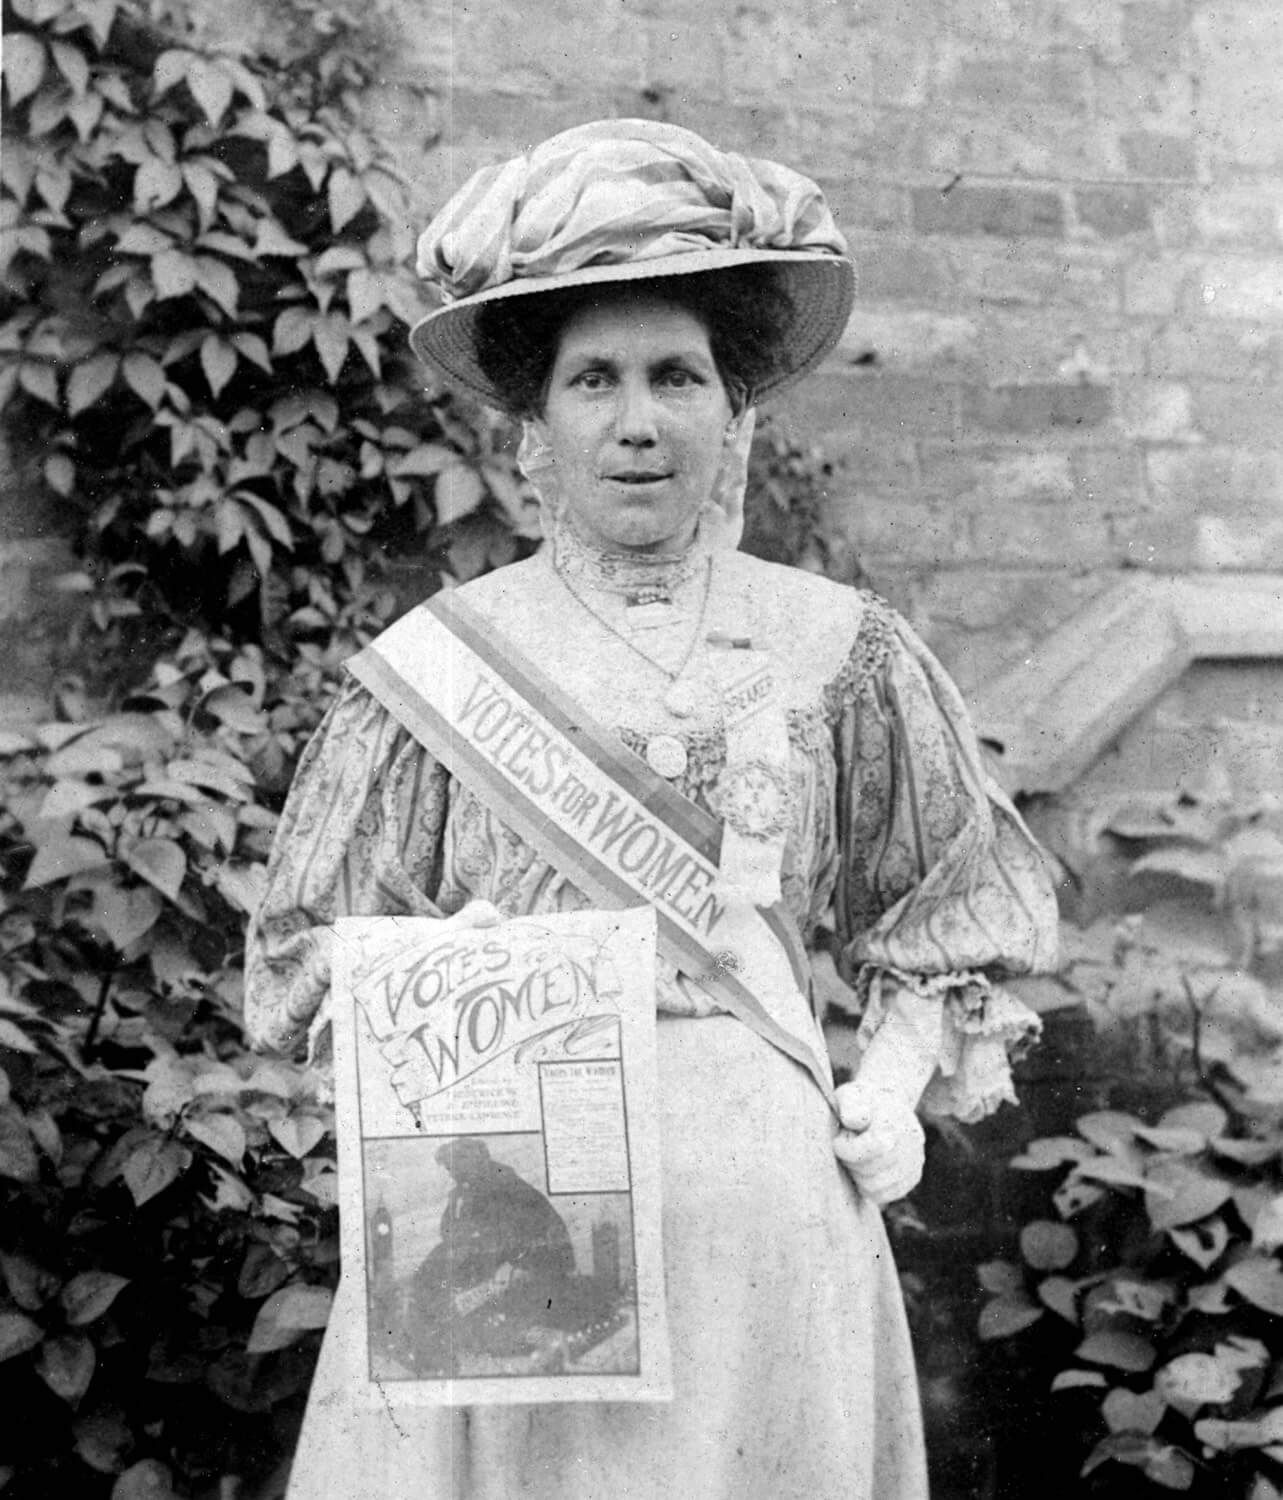 A portrait of Alice Hawkins wearing her suffrage sash and rosette - Peter Barratt